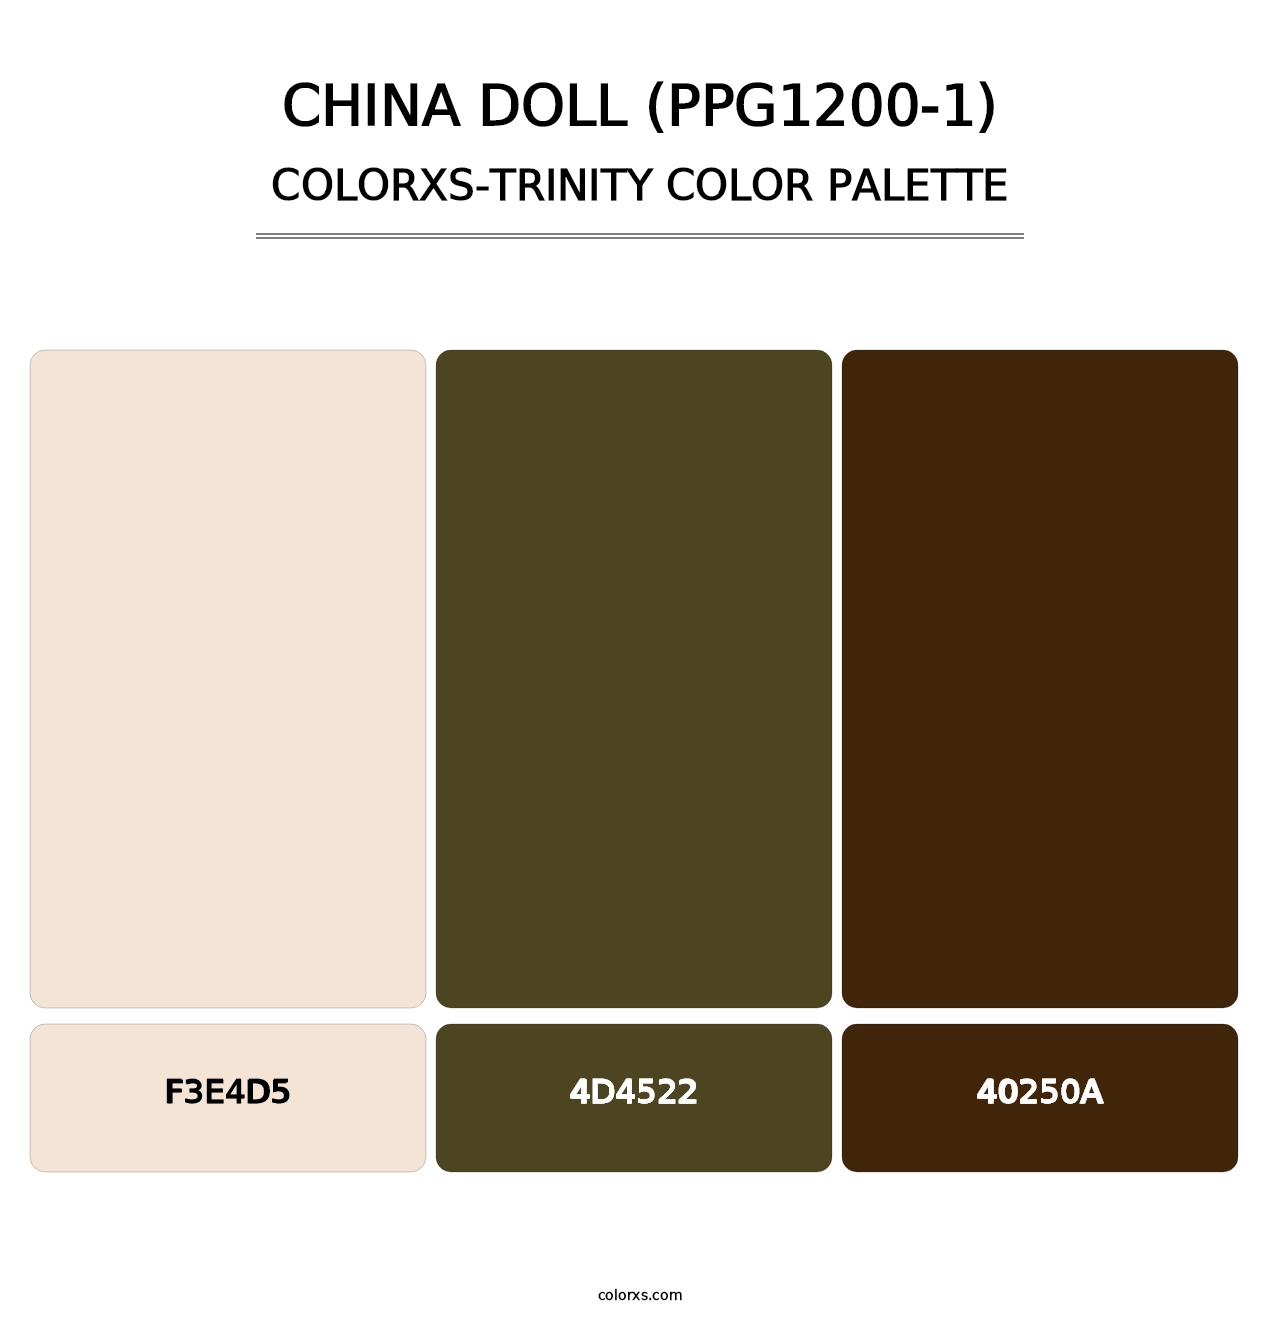 China Doll (PPG1200-1) - Colorxs Trinity Palette